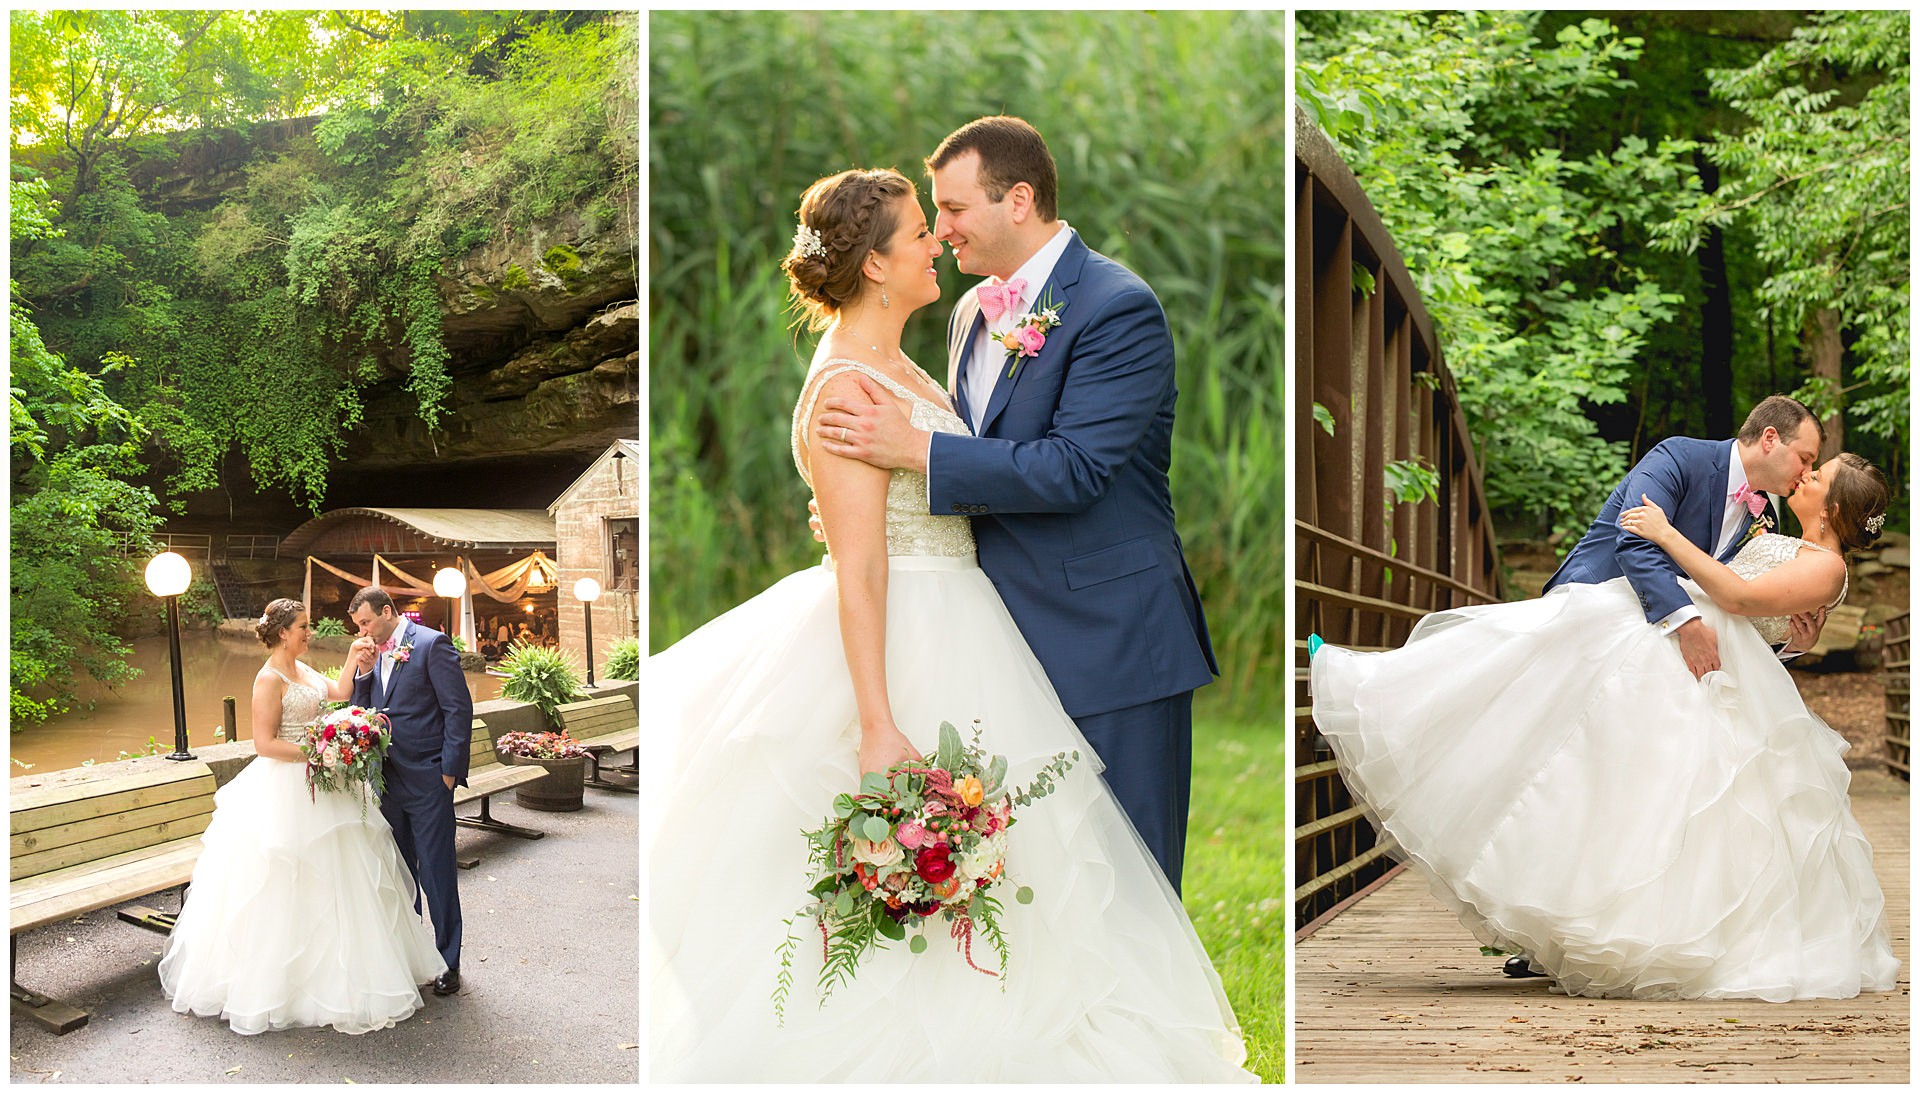 Wedding at Lost River Cave in Bowling Green, Kentucky